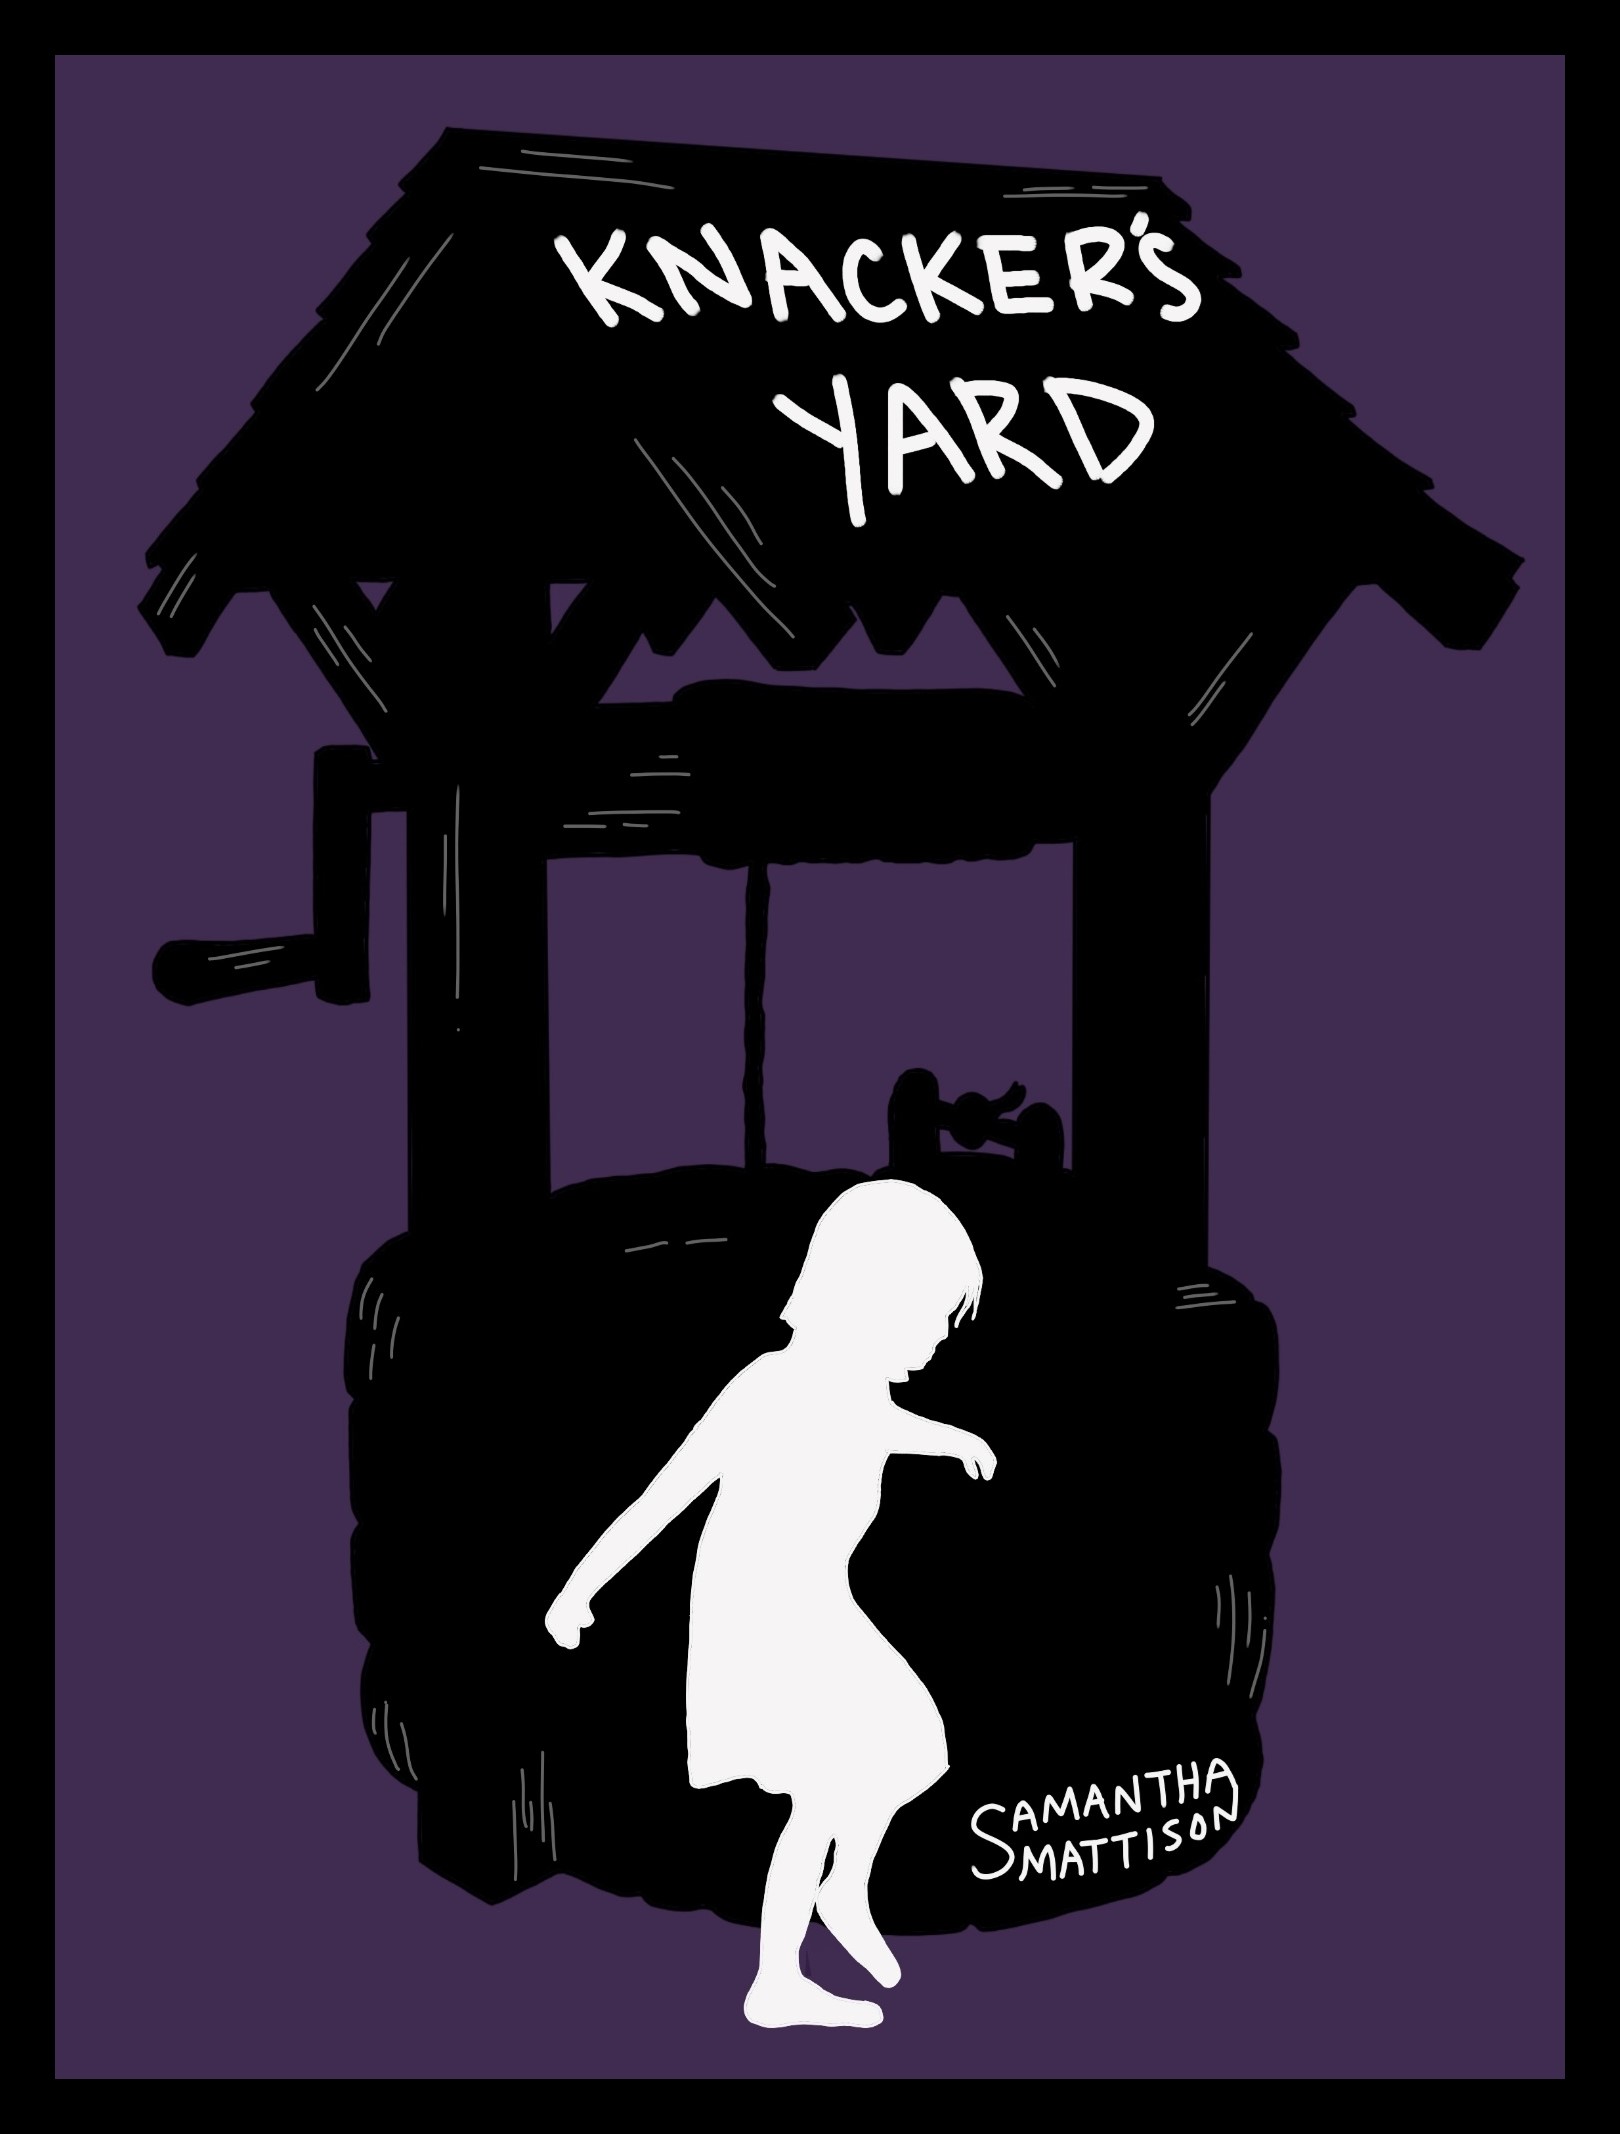 Image of a young girl's silhouette in all white in front of a well. The well is all black with the roof containing the title "Knacker's Yard" in all caps and white lettering. The author's name, Samantha Mattison, is at the bottom of the well in small white lettering. The image is placed on a dark purple background with a black border on the edges.